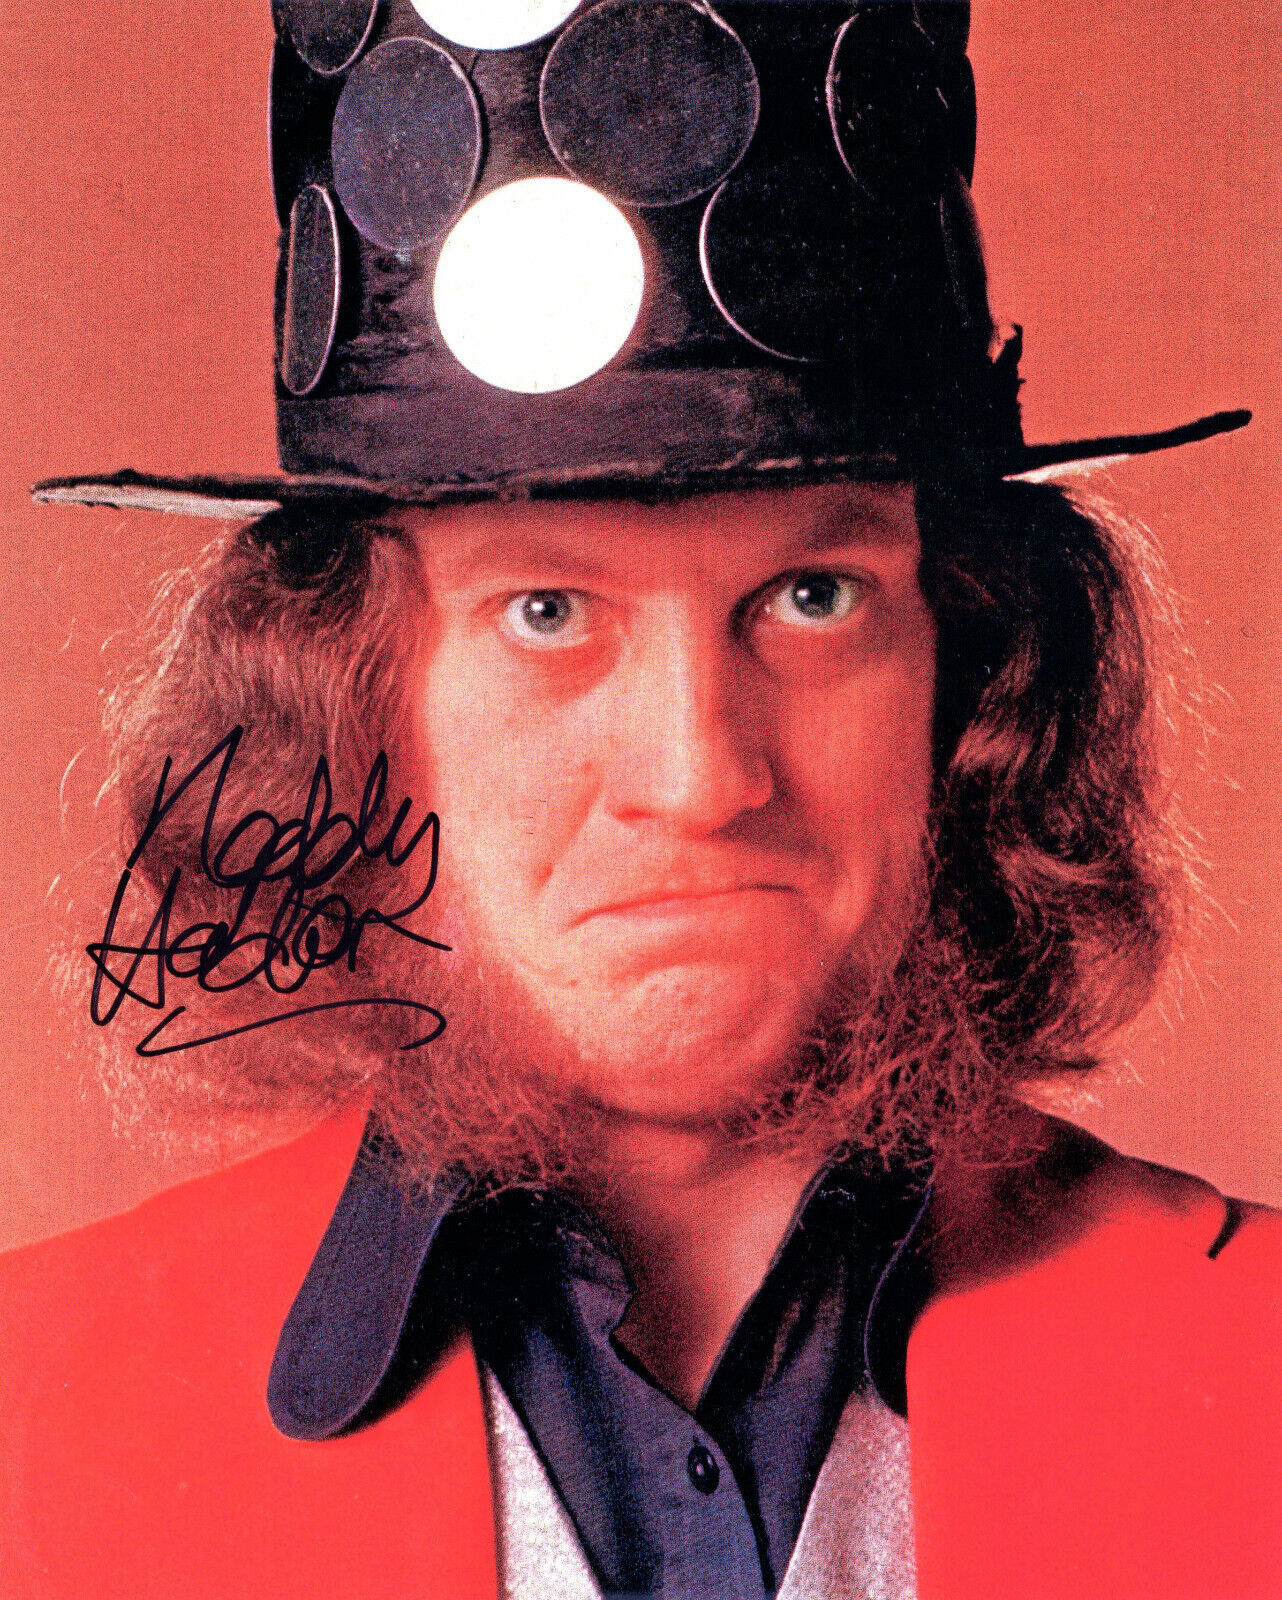 Original Signed Photo Poster painting of Noddy Holder 10x8 + COA